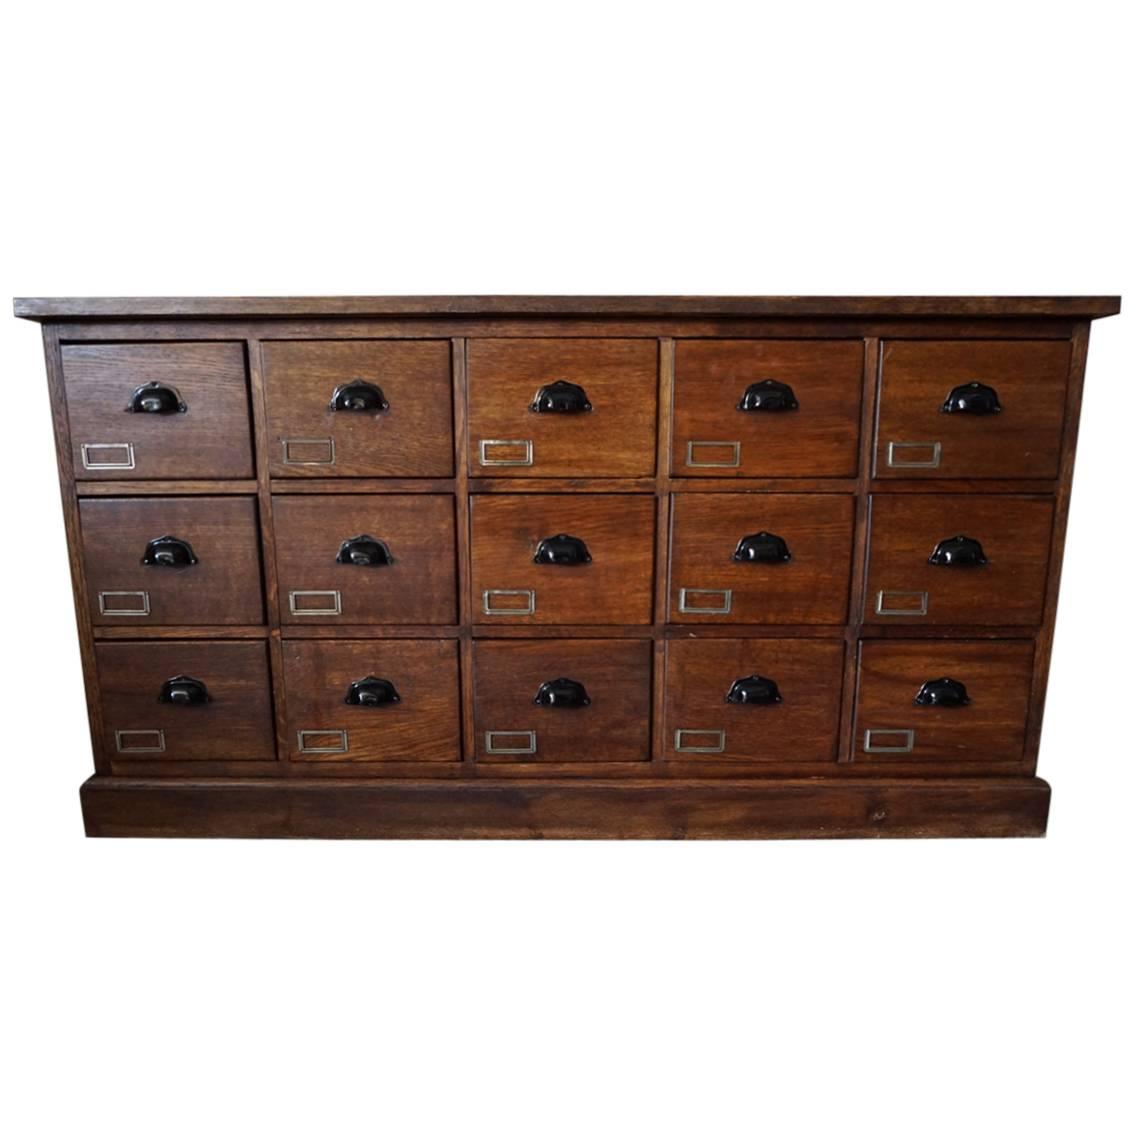 Vintage French Oak Apothecary Bank of Drawers, 1930s